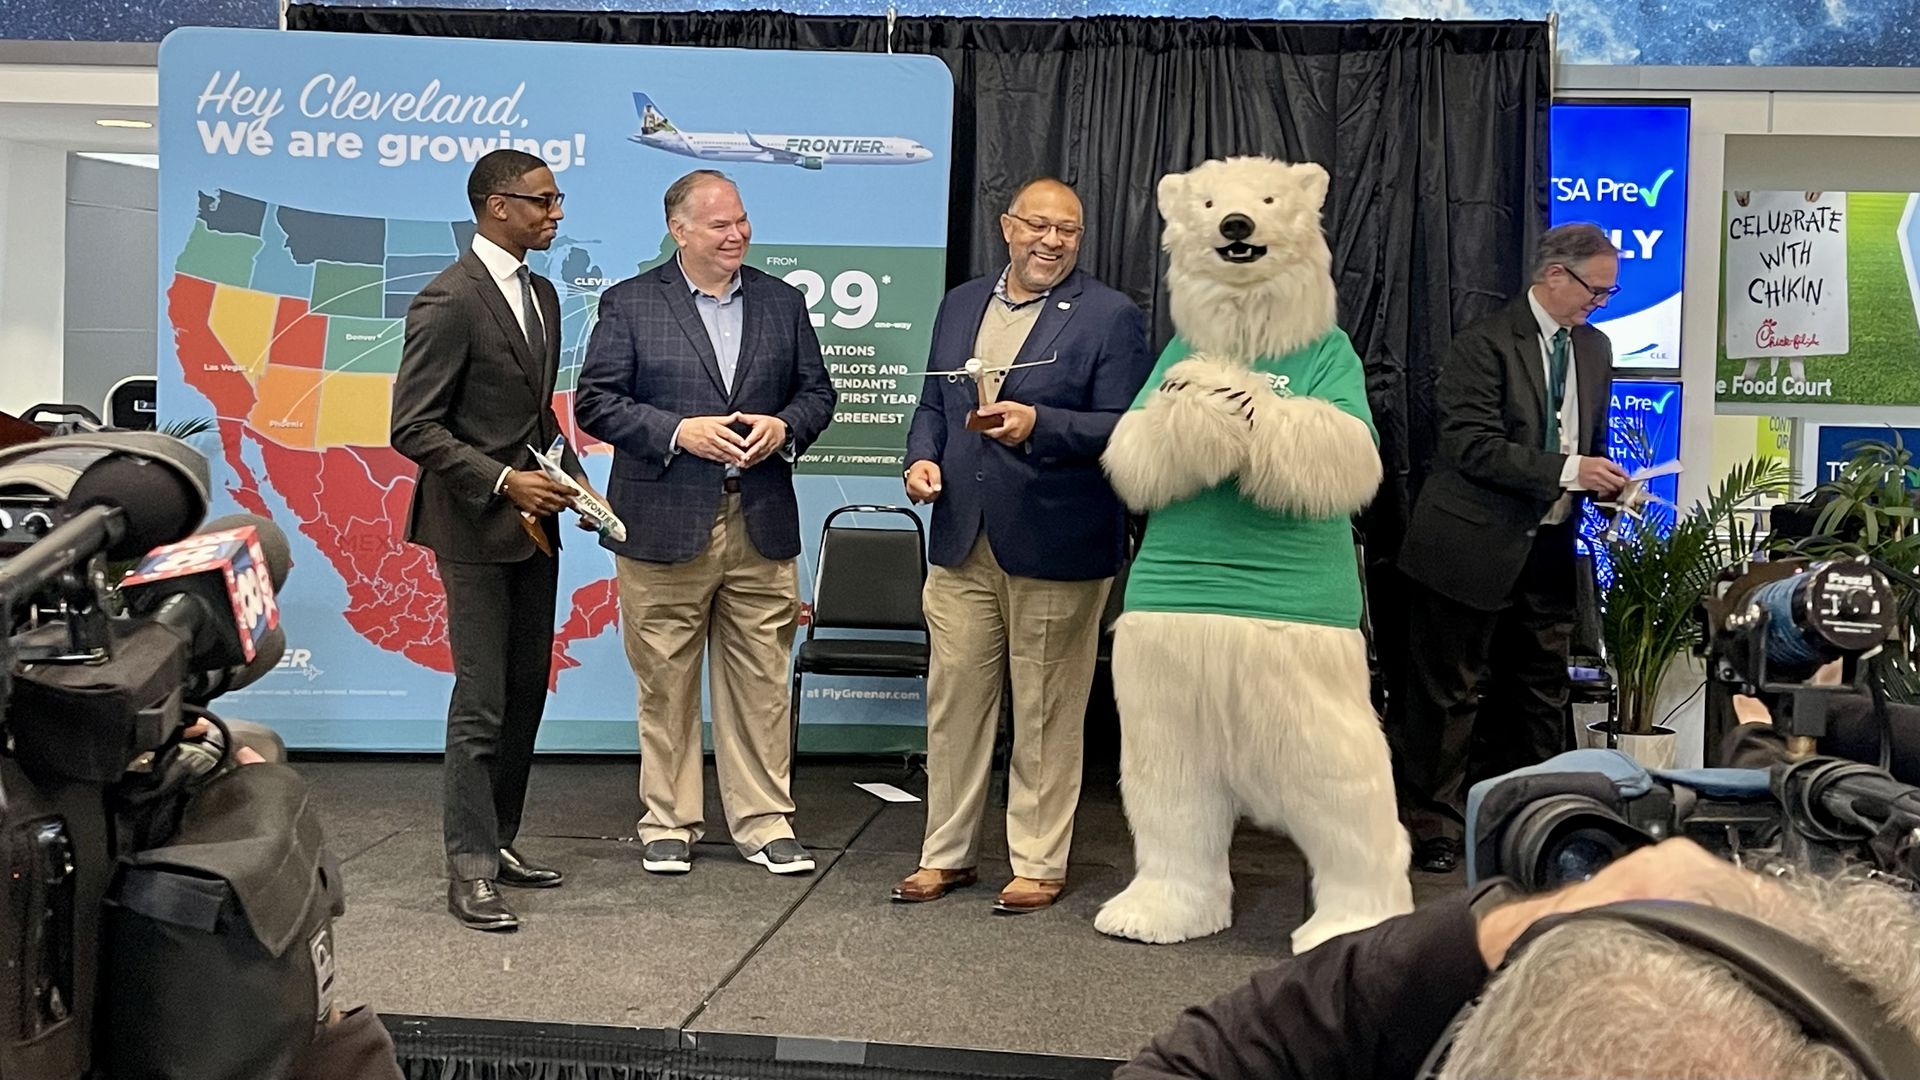 Cleveland officials with Polar Bear mascot for Frontier Airlines standing at press event